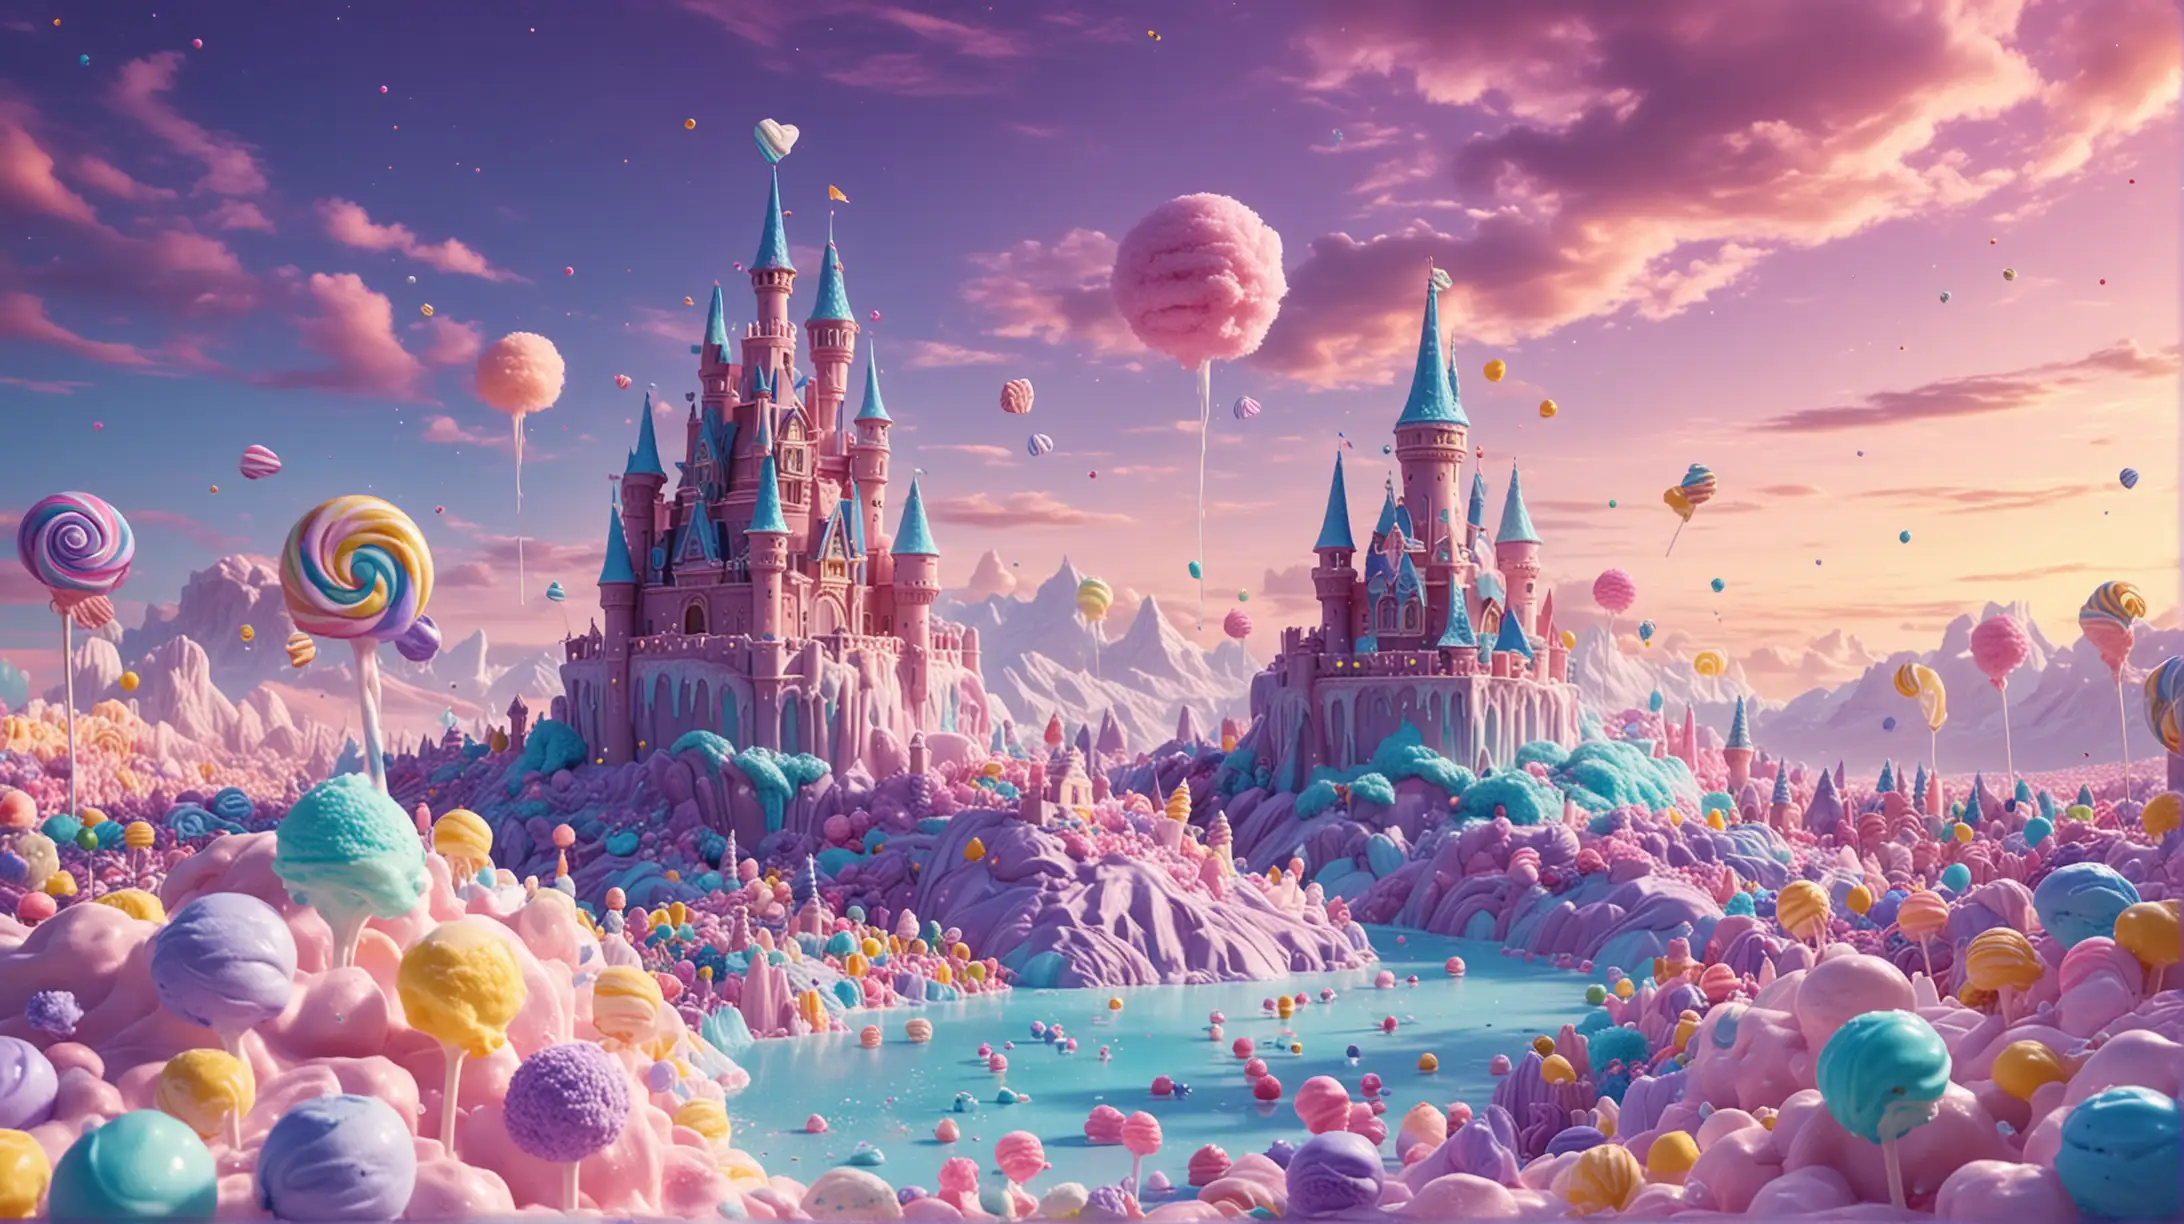 Fairytale candy castles. Whimsical candy wonderland. Lollipops by magical bright-turquoise-sugar rivers surrounded by candy and whip cream and ice cream. Candy in the middle of ice cream-frosting hills. Candy-sprinkles. Purple. Blue. 8K. bright-yellow, and purple sky with cotton-candy clouds and sugary planet in sky.